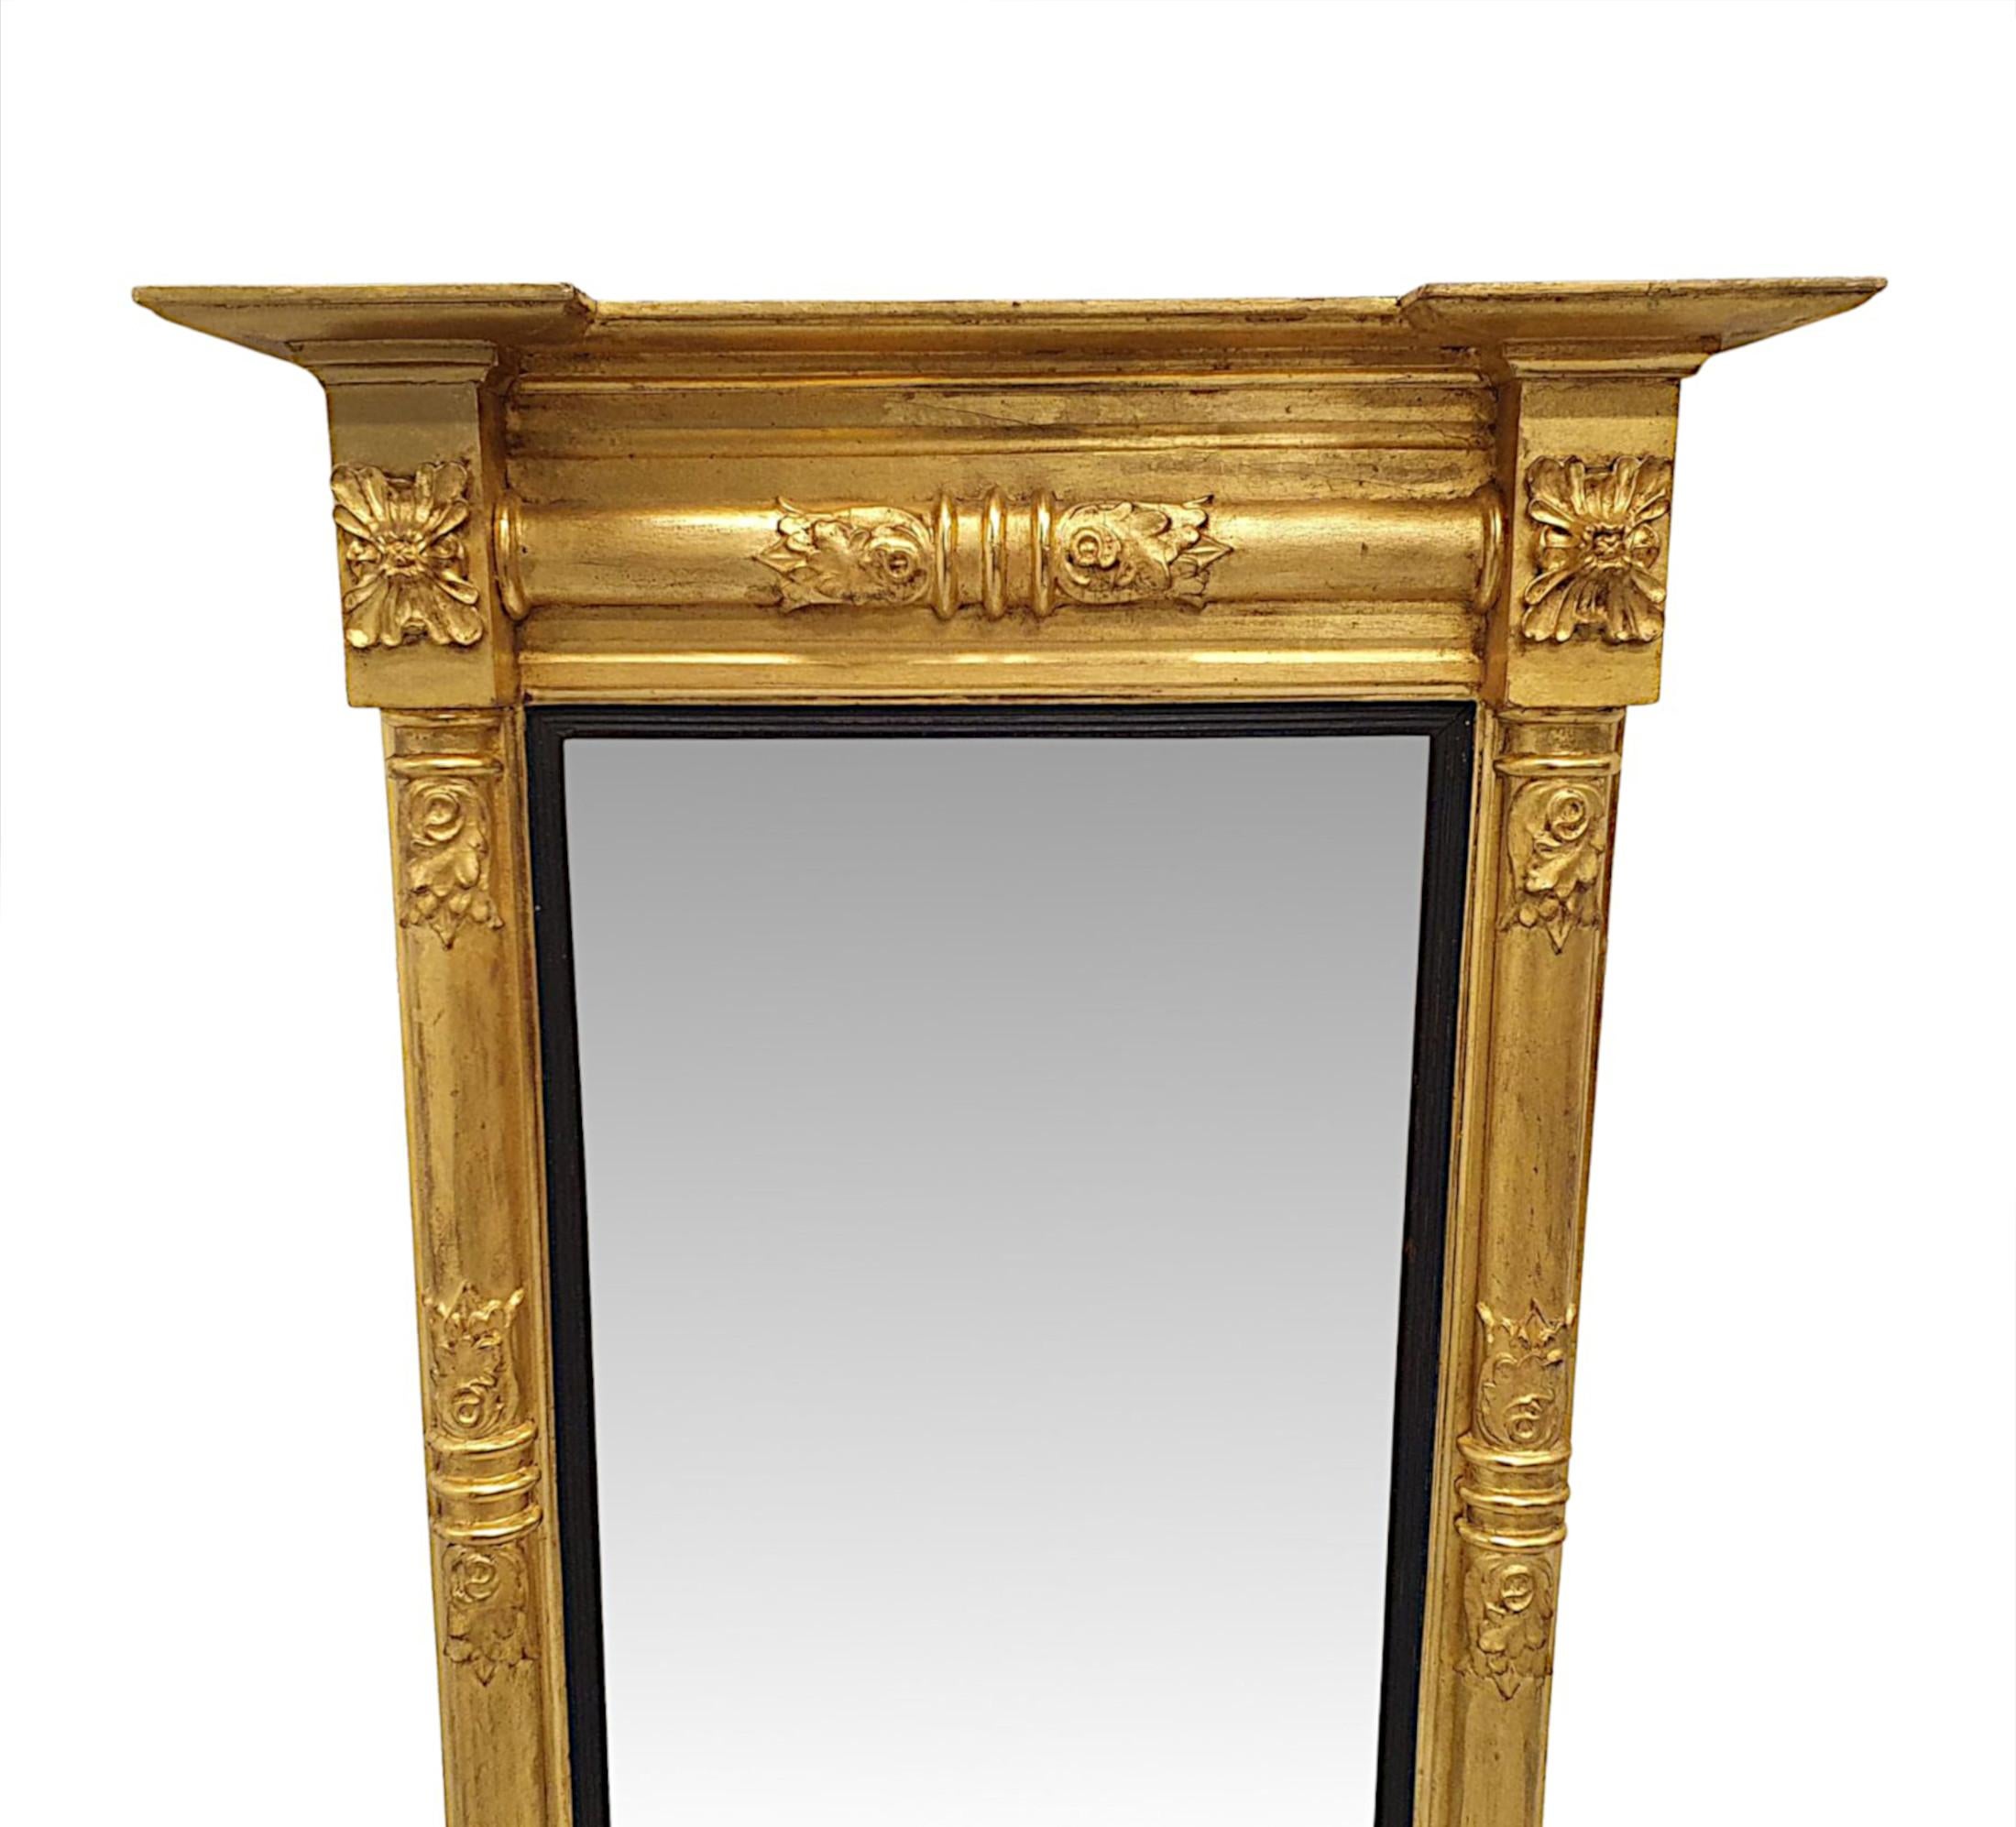 A very rare early 19th Century William IV giltwood pier mirror finely hand carved and of exceptional quality.  The moulded and fluted giltwood frame is surmounted with an overhanging inverse breakfront pediment above panelled frieze with beautifully